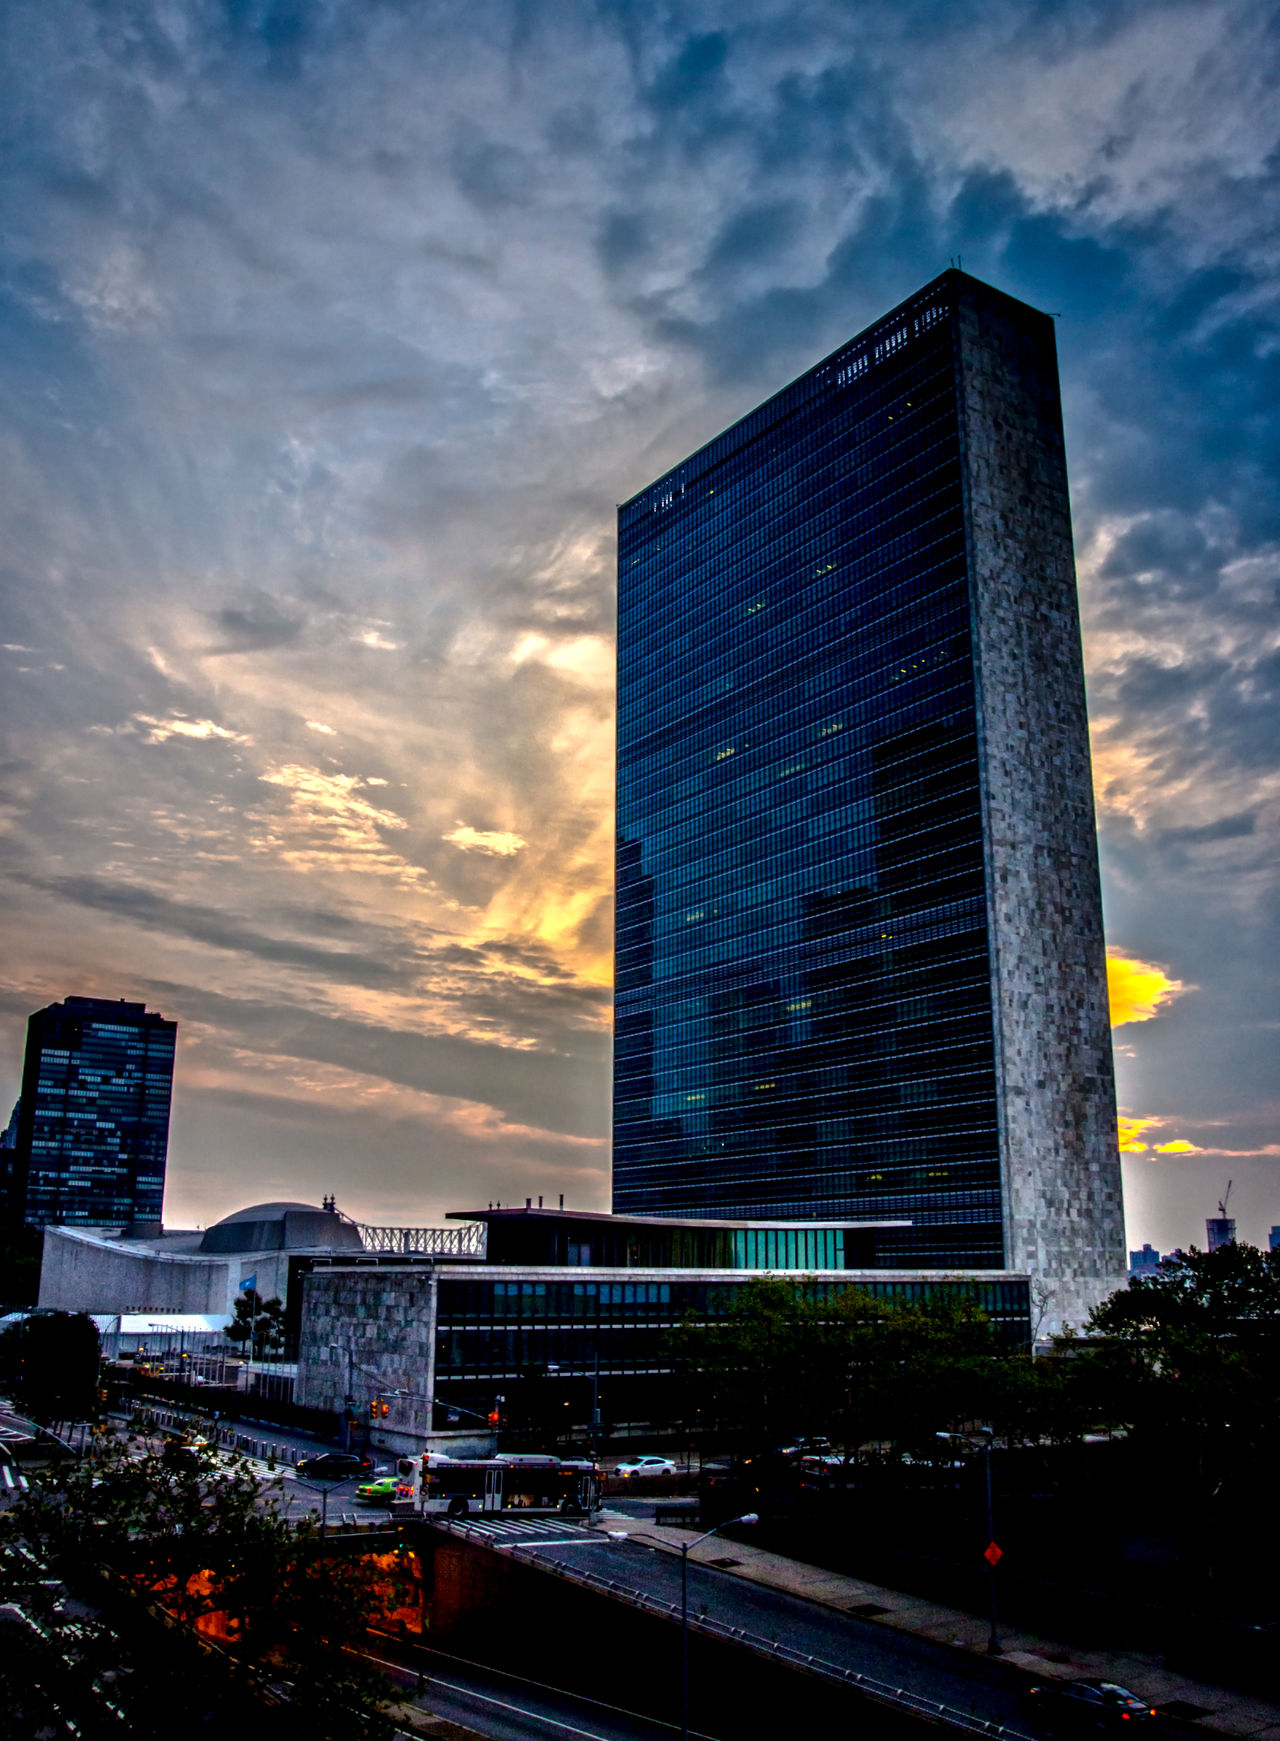 United nations building